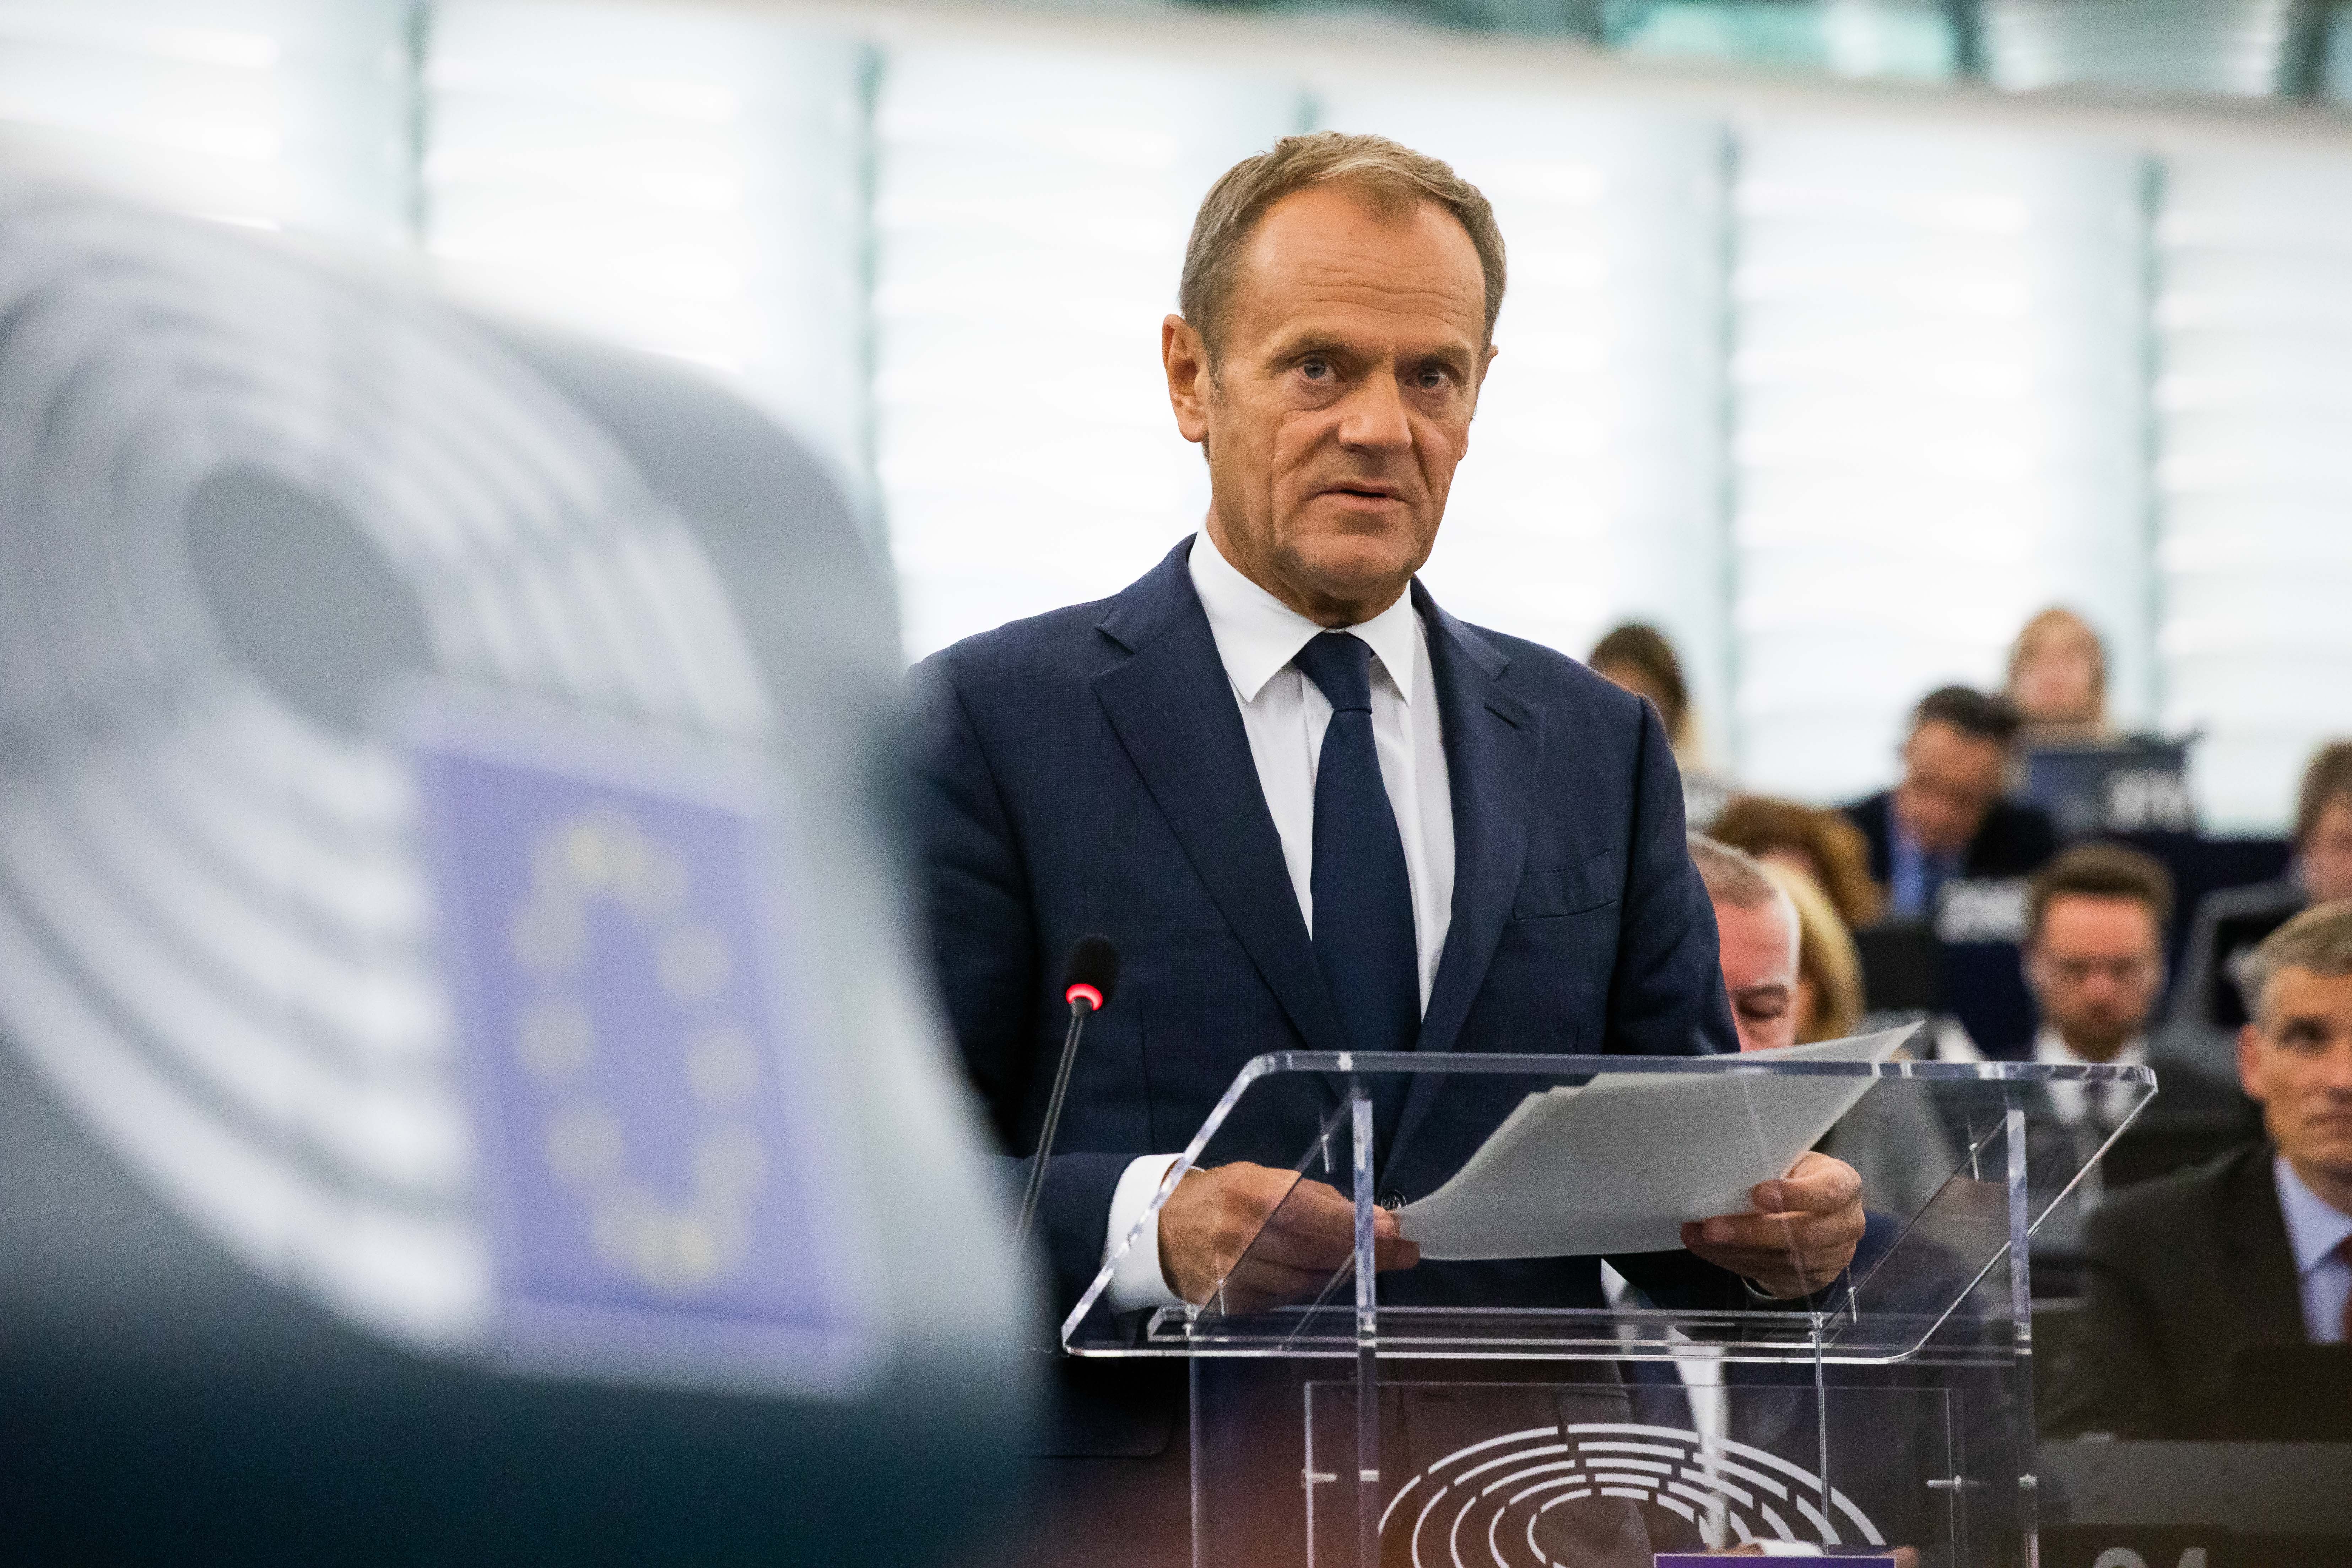 Donald Tusk, President of the European Council, speaks at a session of the European Parliament. Photo: DPA